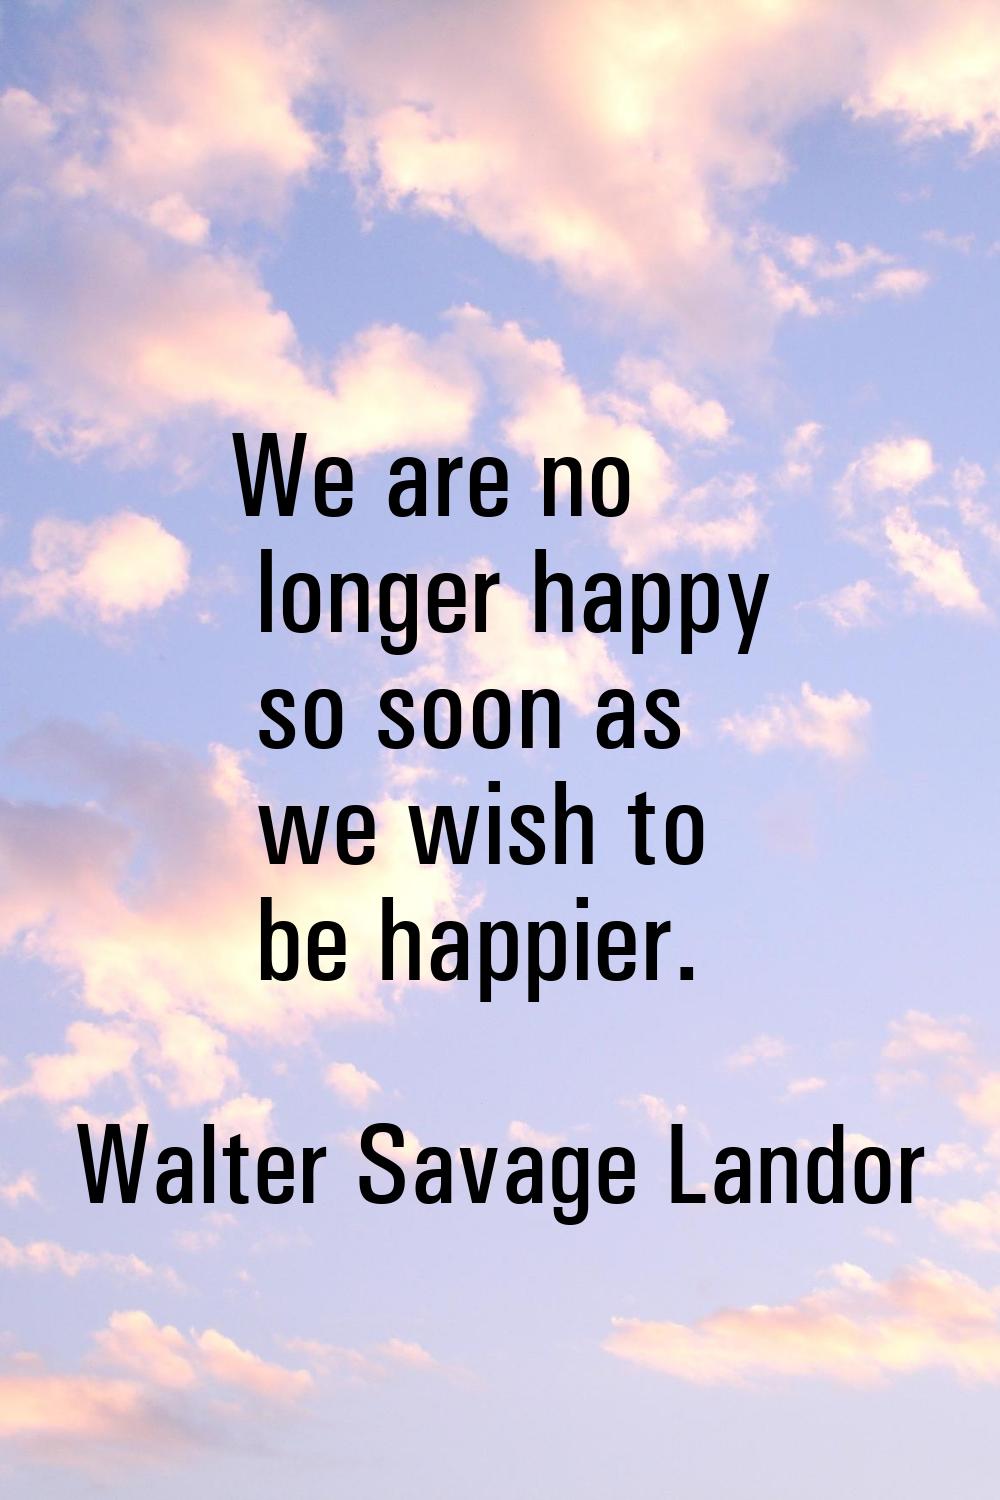 We are no longer happy so soon as we wish to be happier.